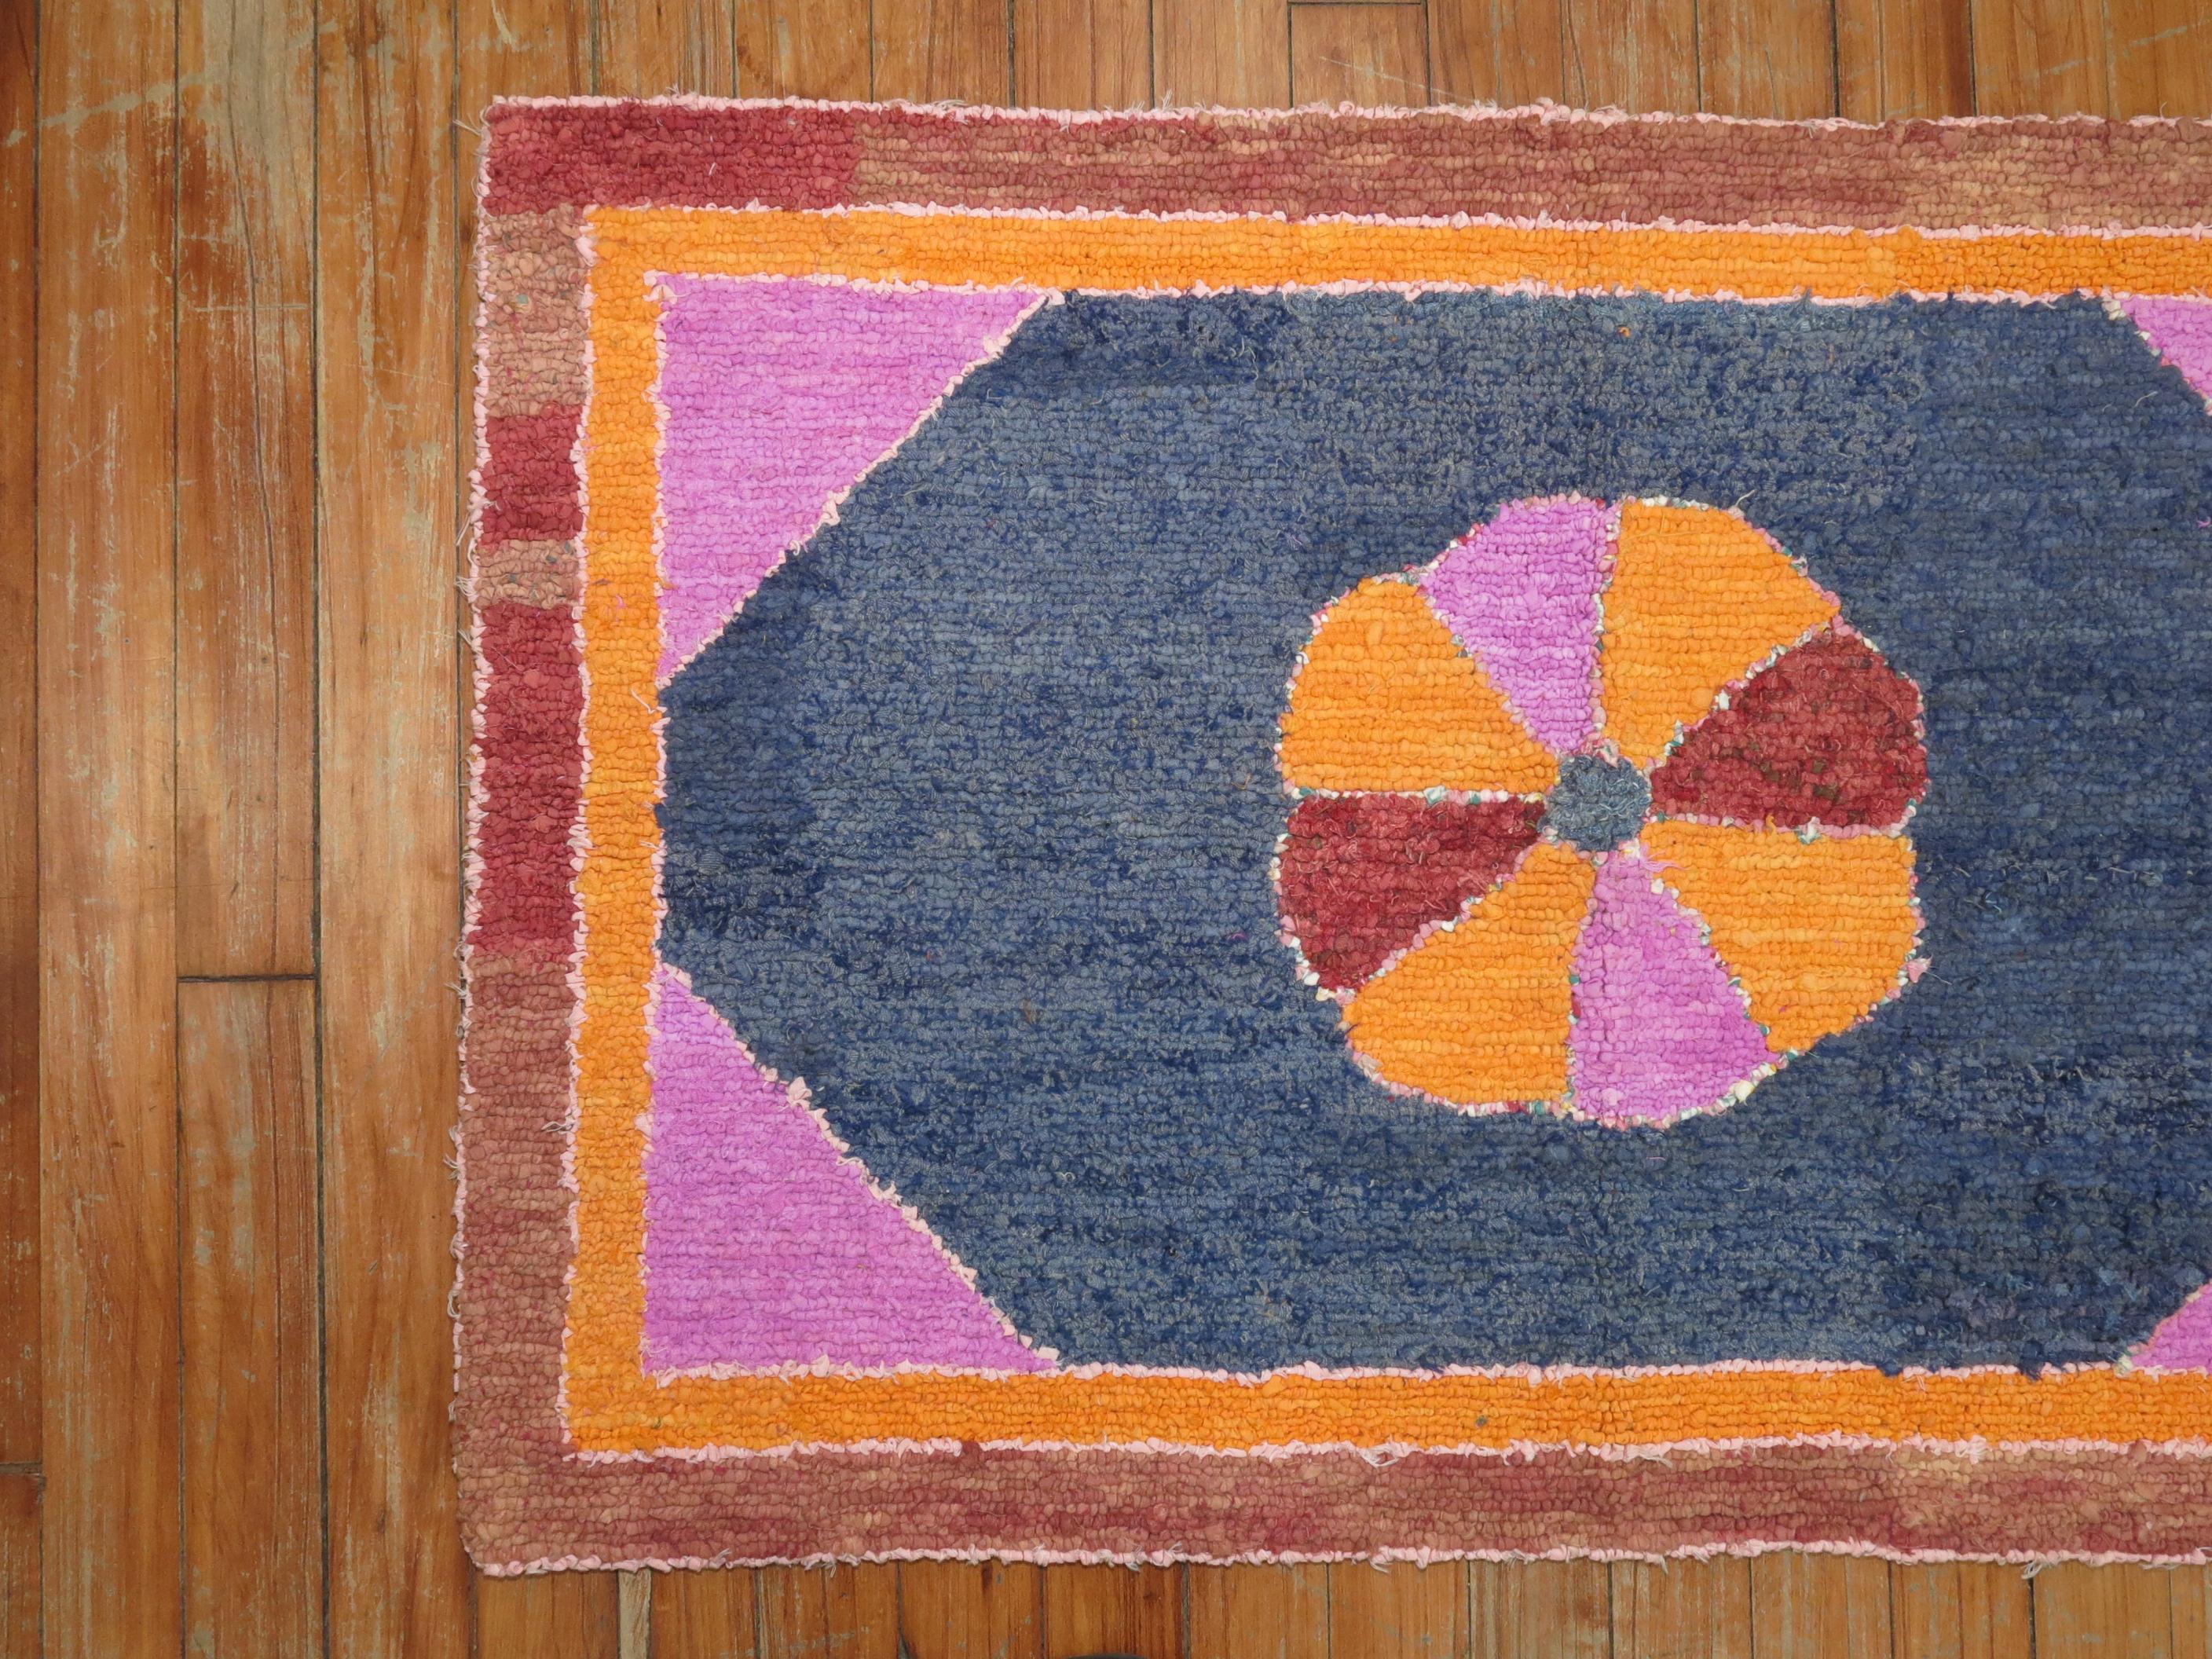 A cheerfully colored handmade decorative American hooked rug from the early part of the 20th century. Condition is really nice. No stains, no tears, has been professionally cleaned. Protective backing included.